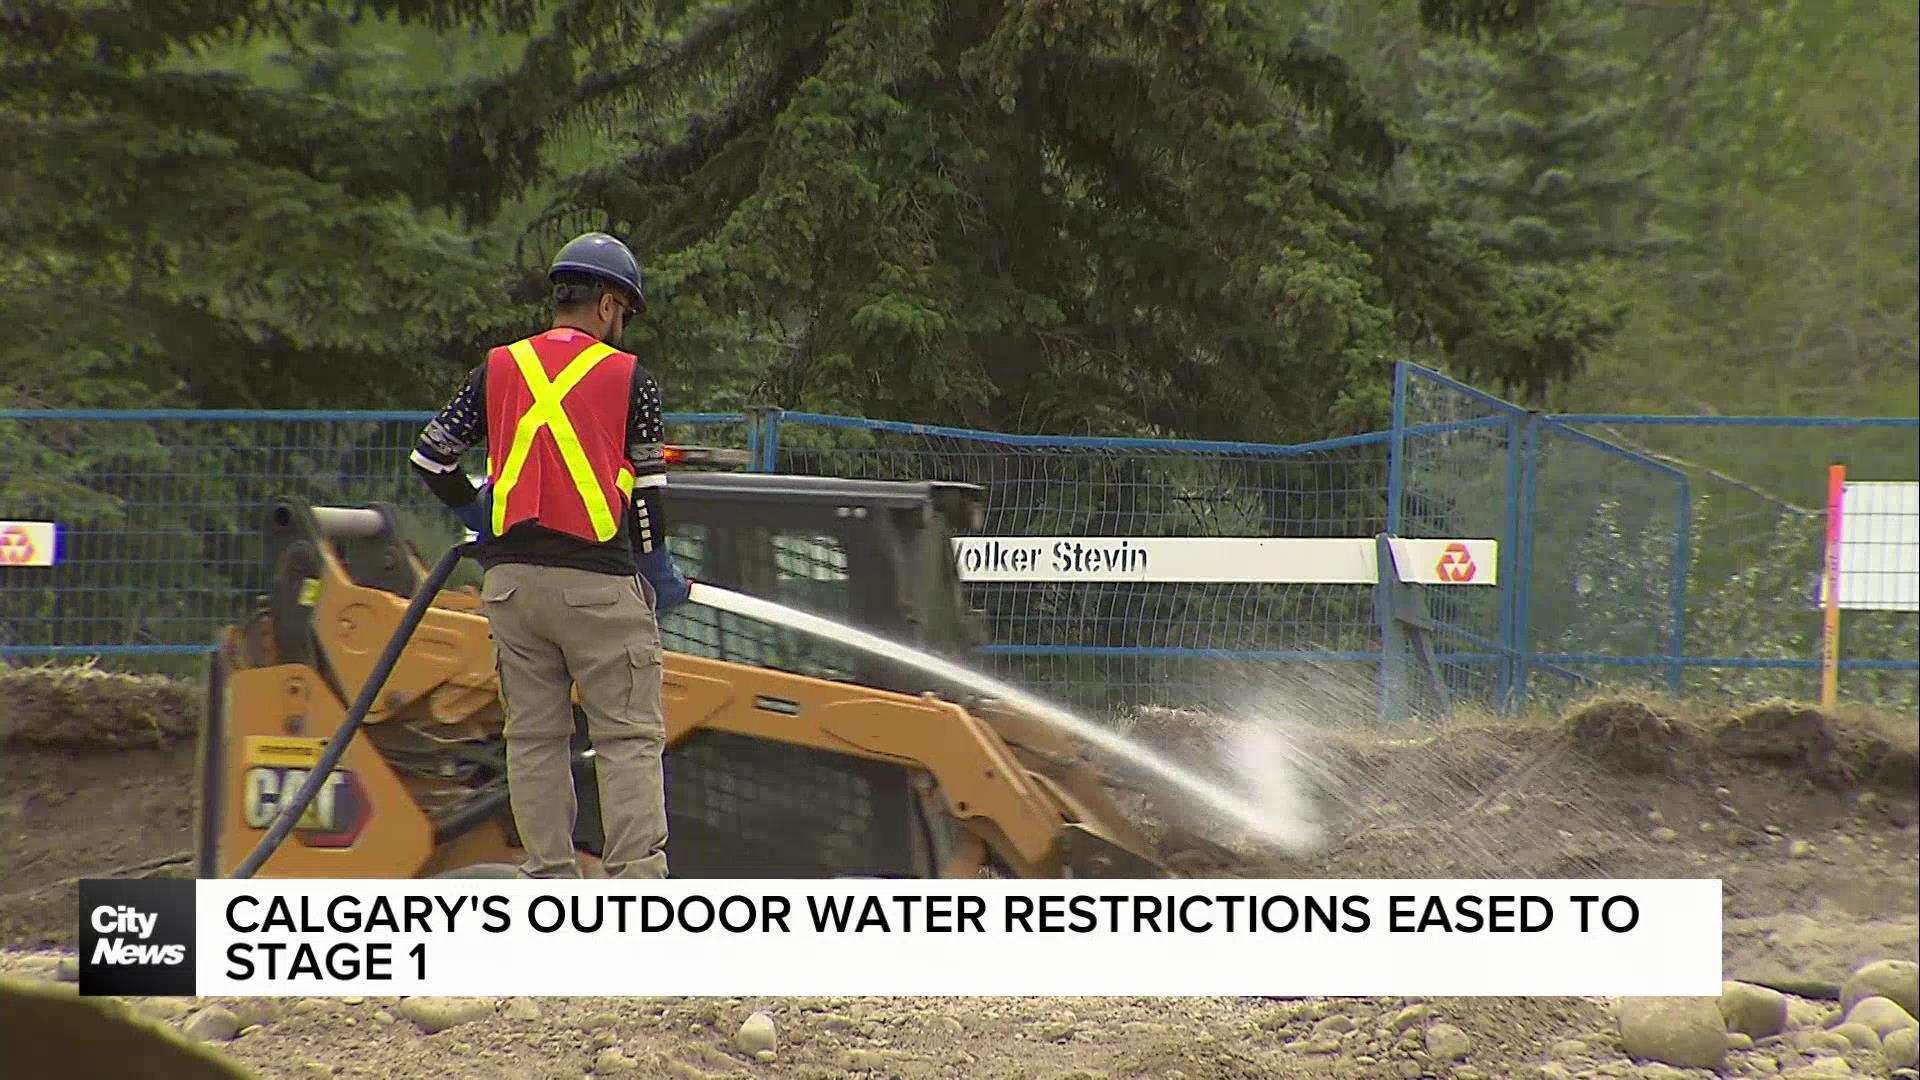 Calgary's outdoor water restrictions eased to Stage 1